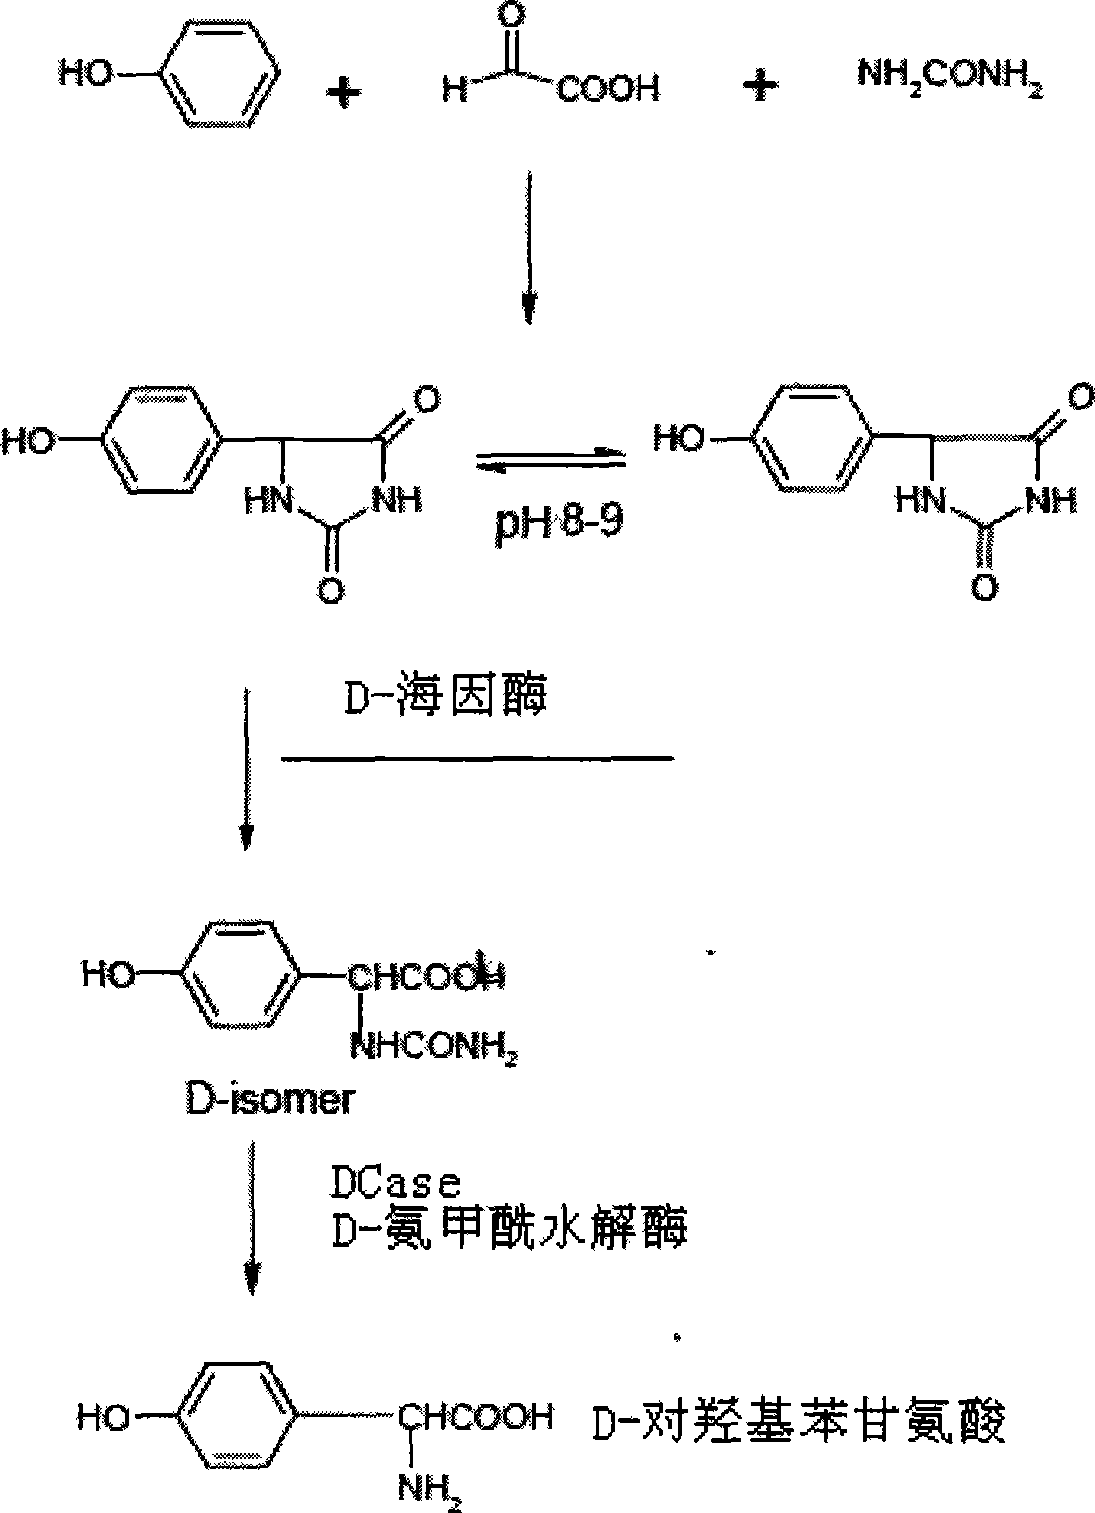 Mutant of D-carbamyl hydrolysis enzyme and application thereof